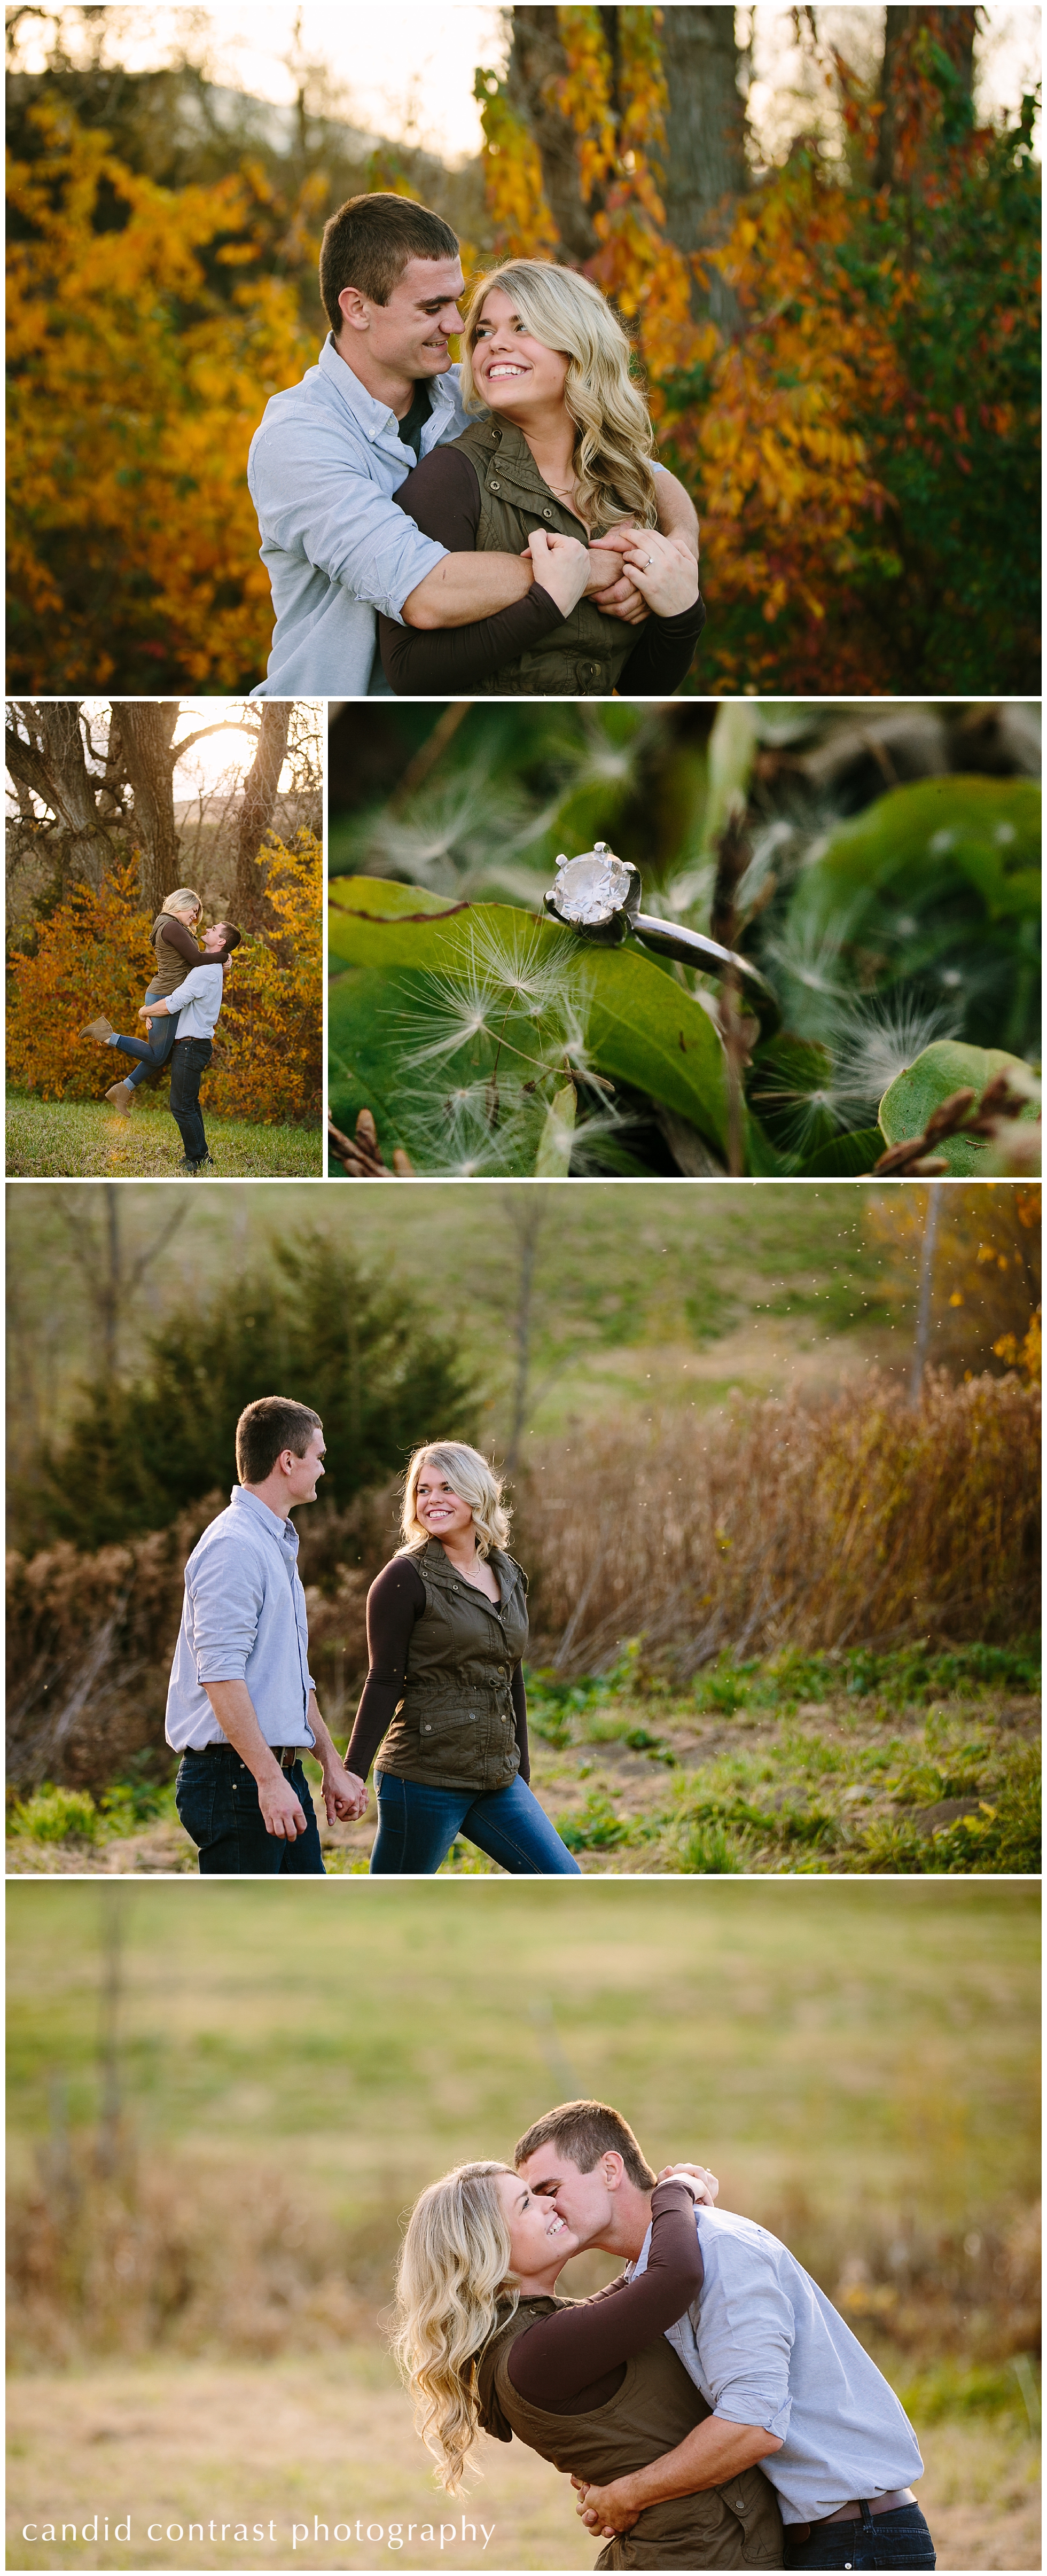 dubuque iowa wedding photographer, fall engagement photos with engagement ring, candid contrast photography